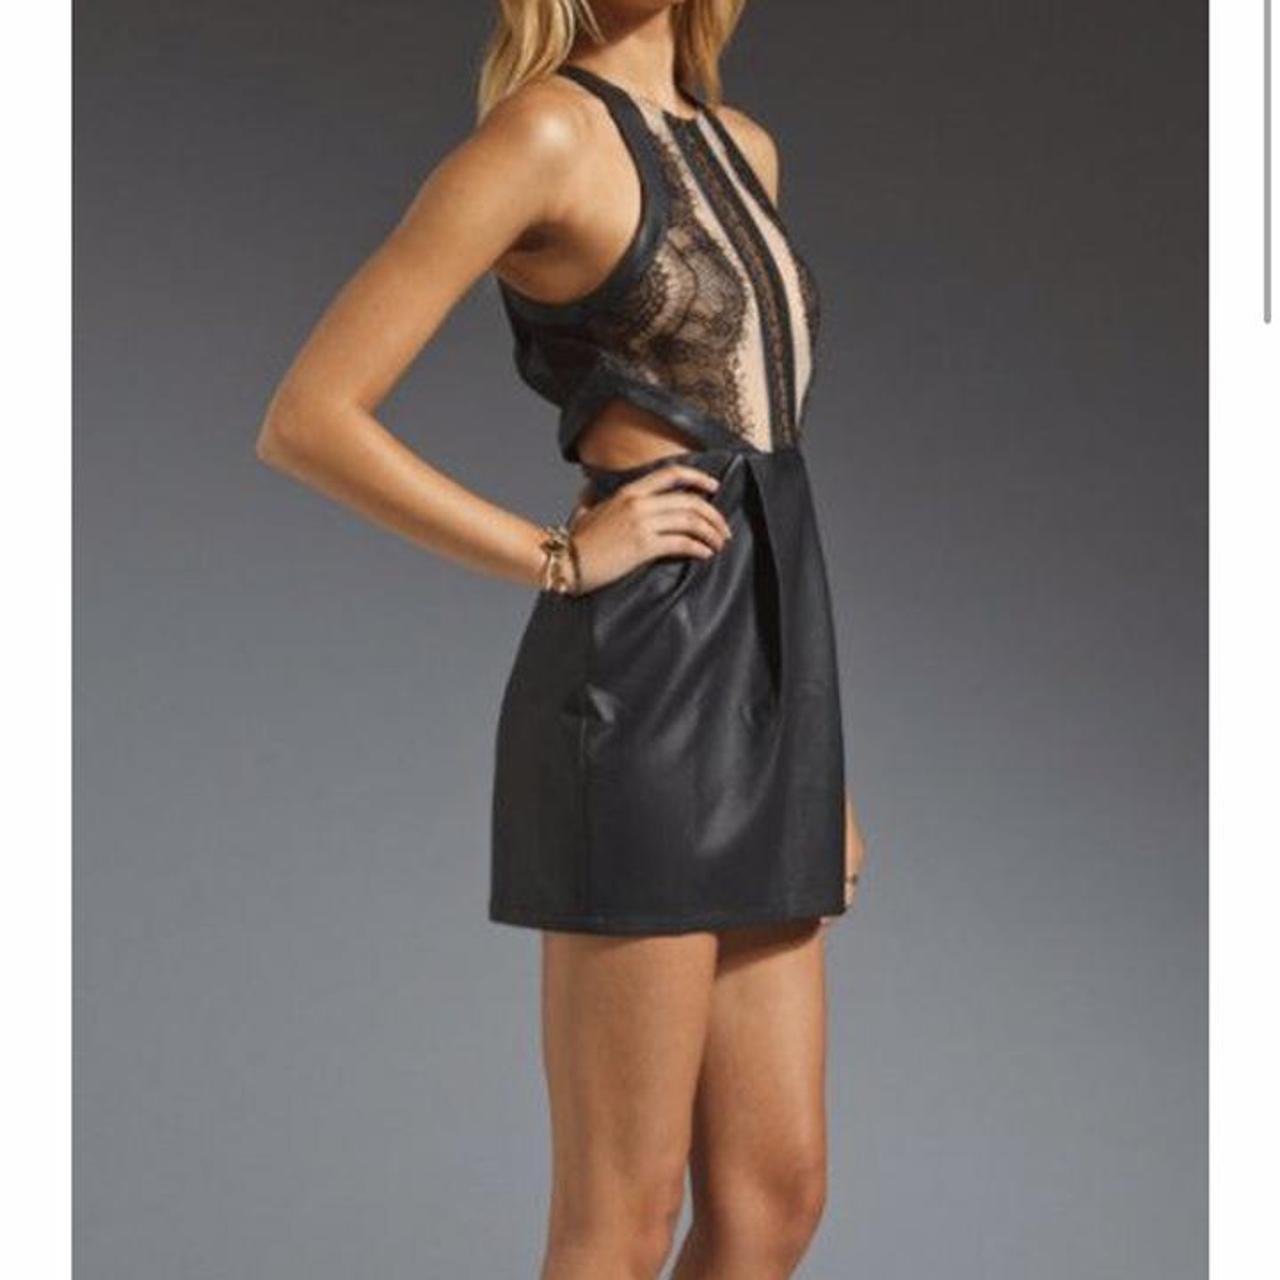 Product Image 2 - Three floor: lace leather dress

#lacedress#leather#minidress